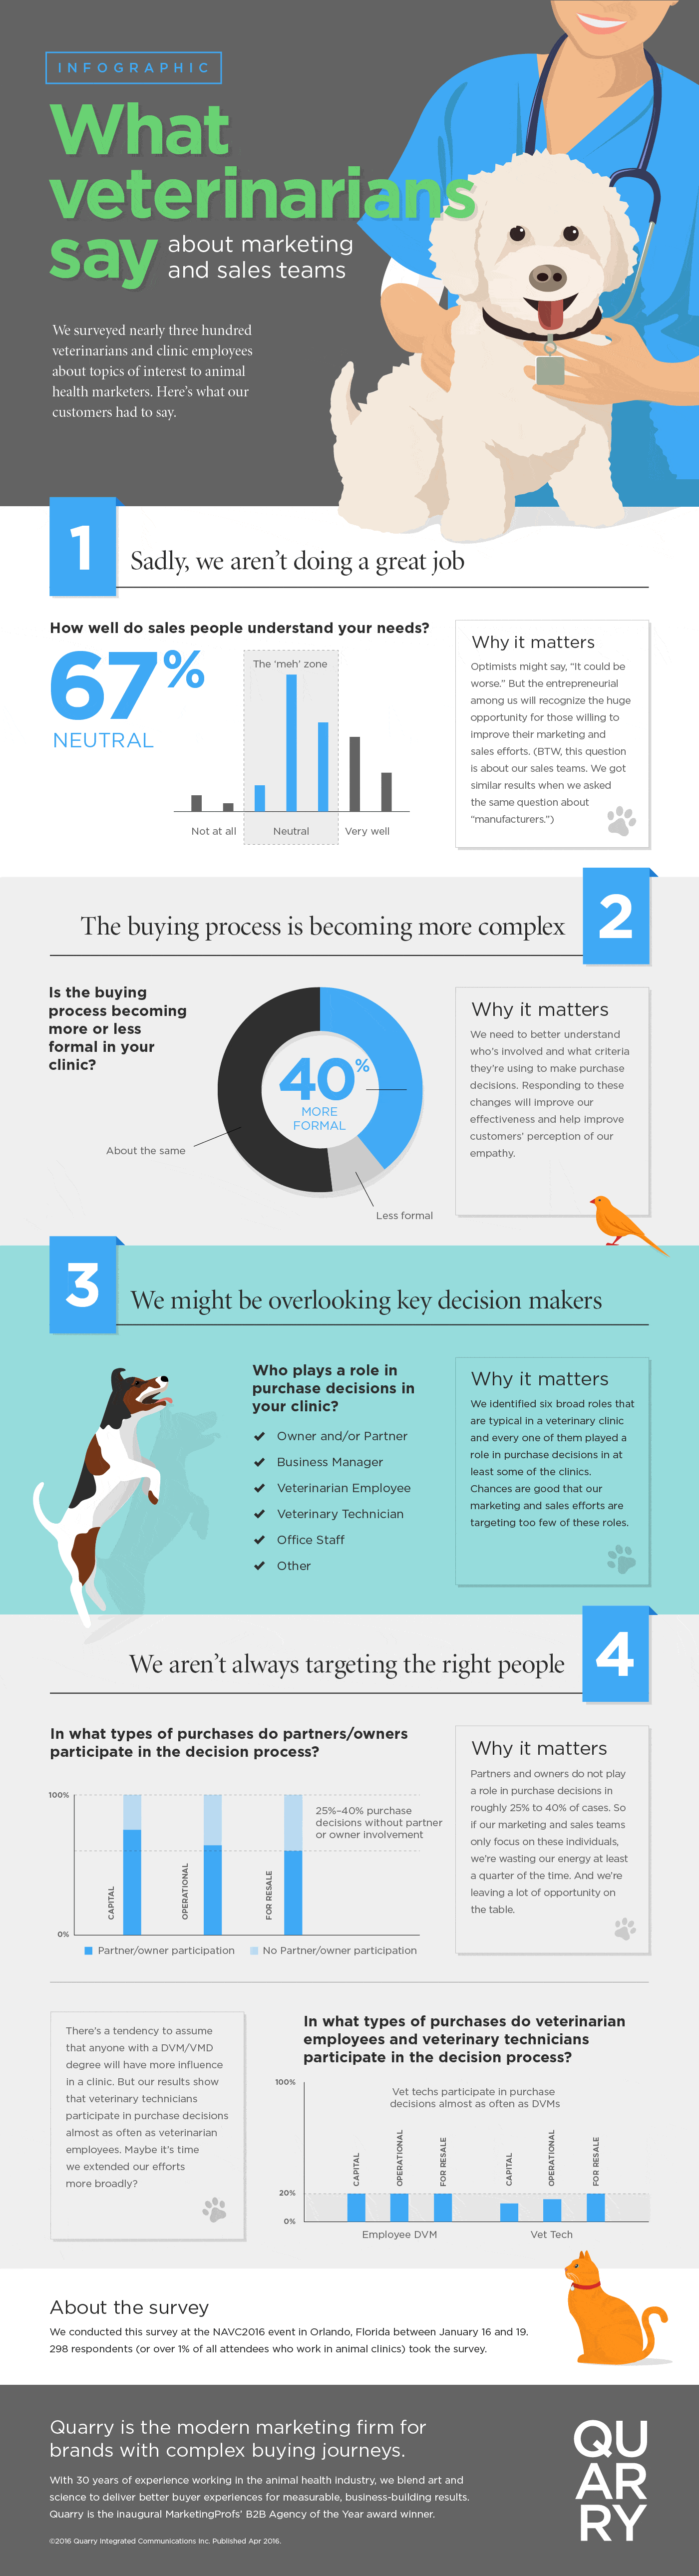 What veterinarians say about marketing and sales teams infographic.  Download pdf for accessible version.